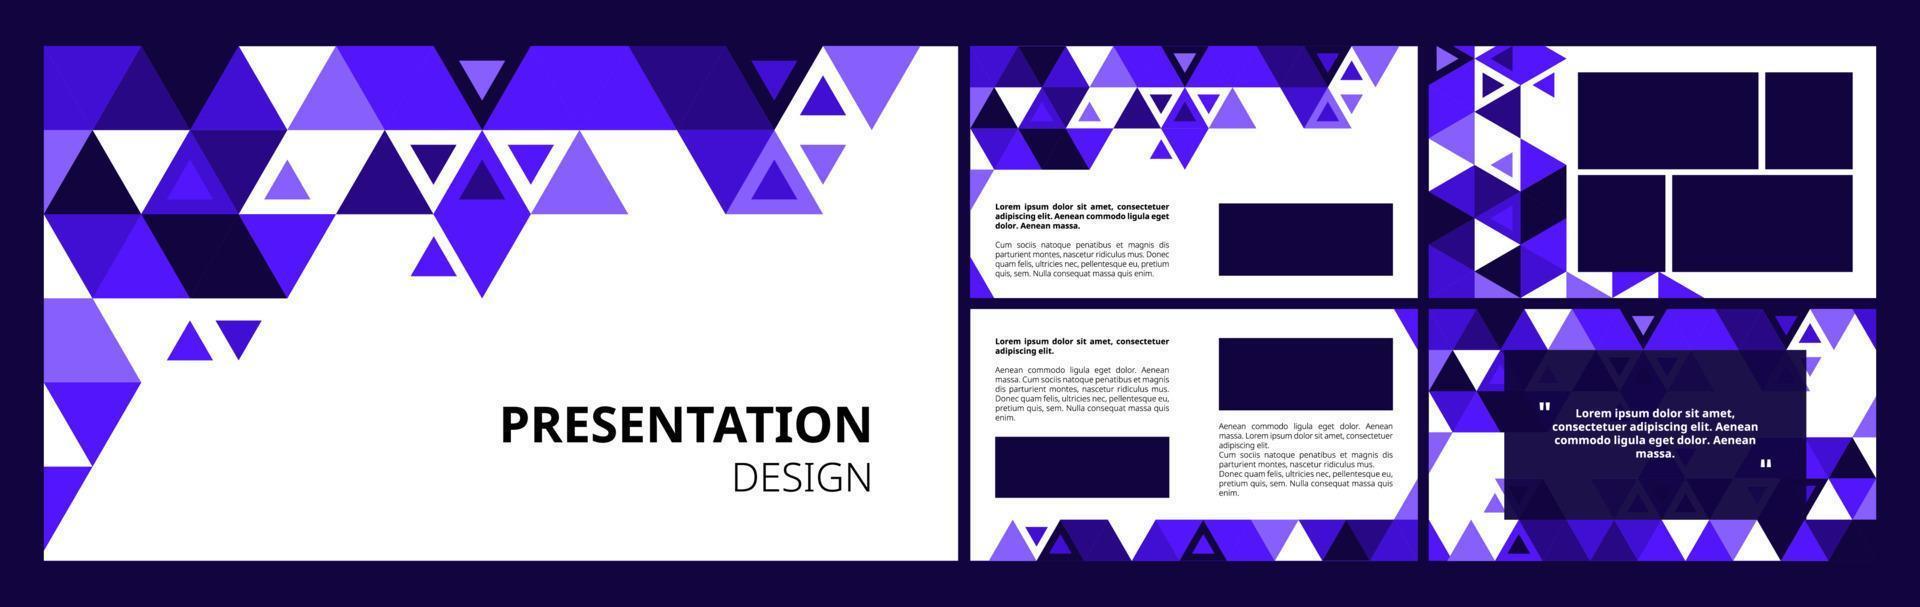 Set of modern presentation templates. Presentation design, portfolio vector layout with geometric colorful trendy triangle geometric shapes. Slide page, flyer, website, company profile